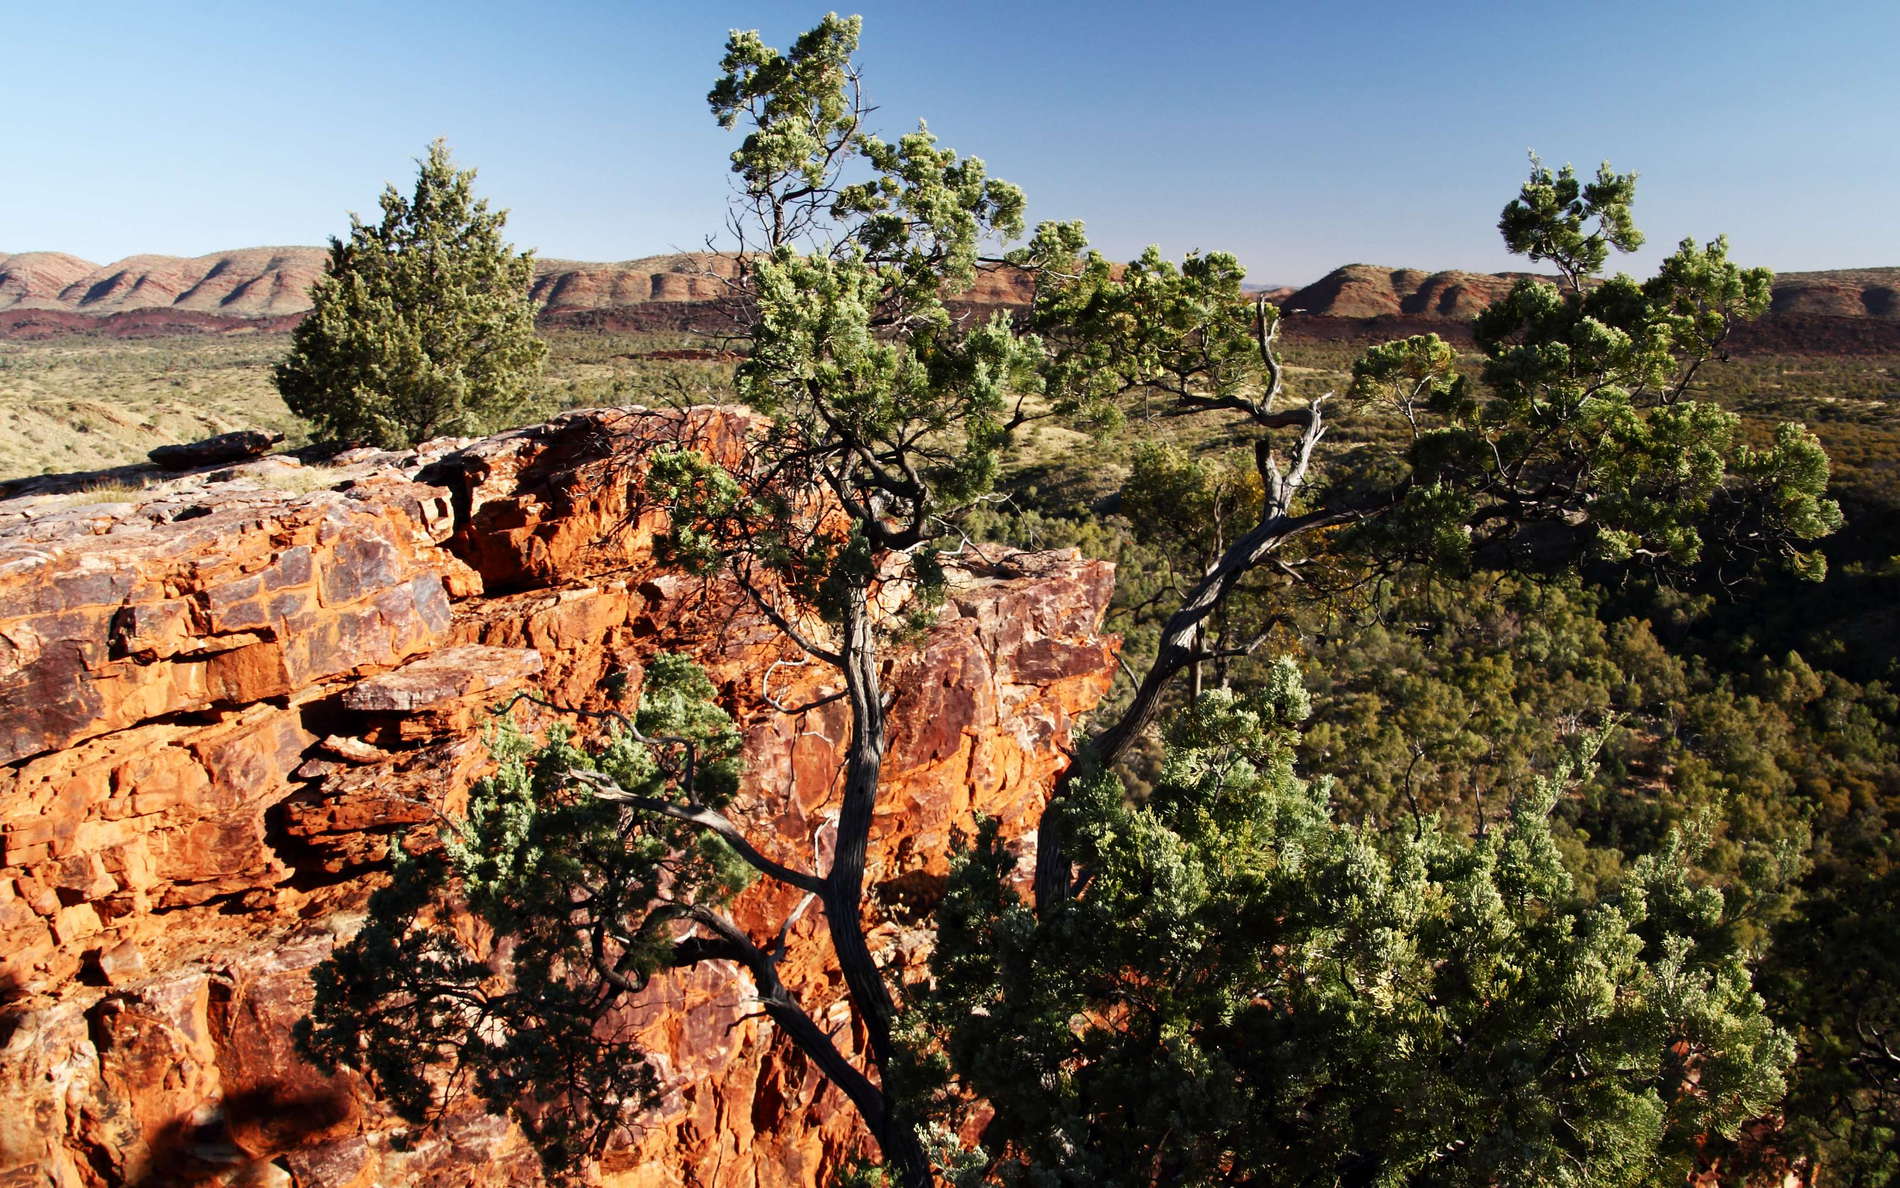 Serpentine Gorge outlook with Callitris